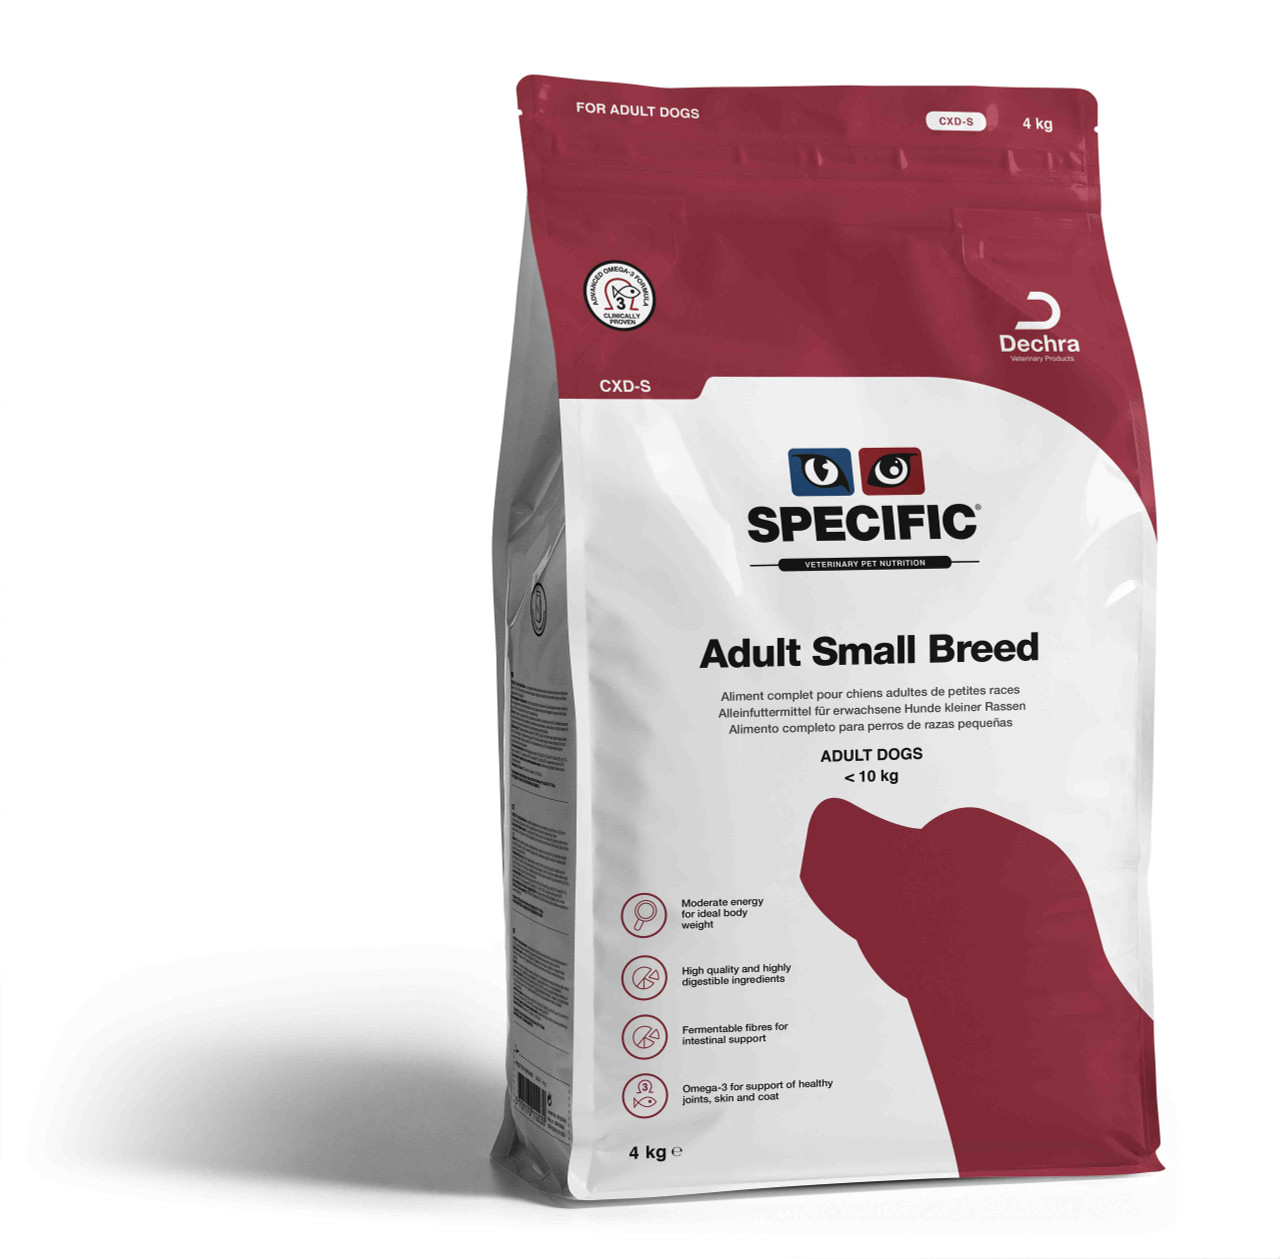 Adult Small Breed CXD-S hundfoder – 4 kg